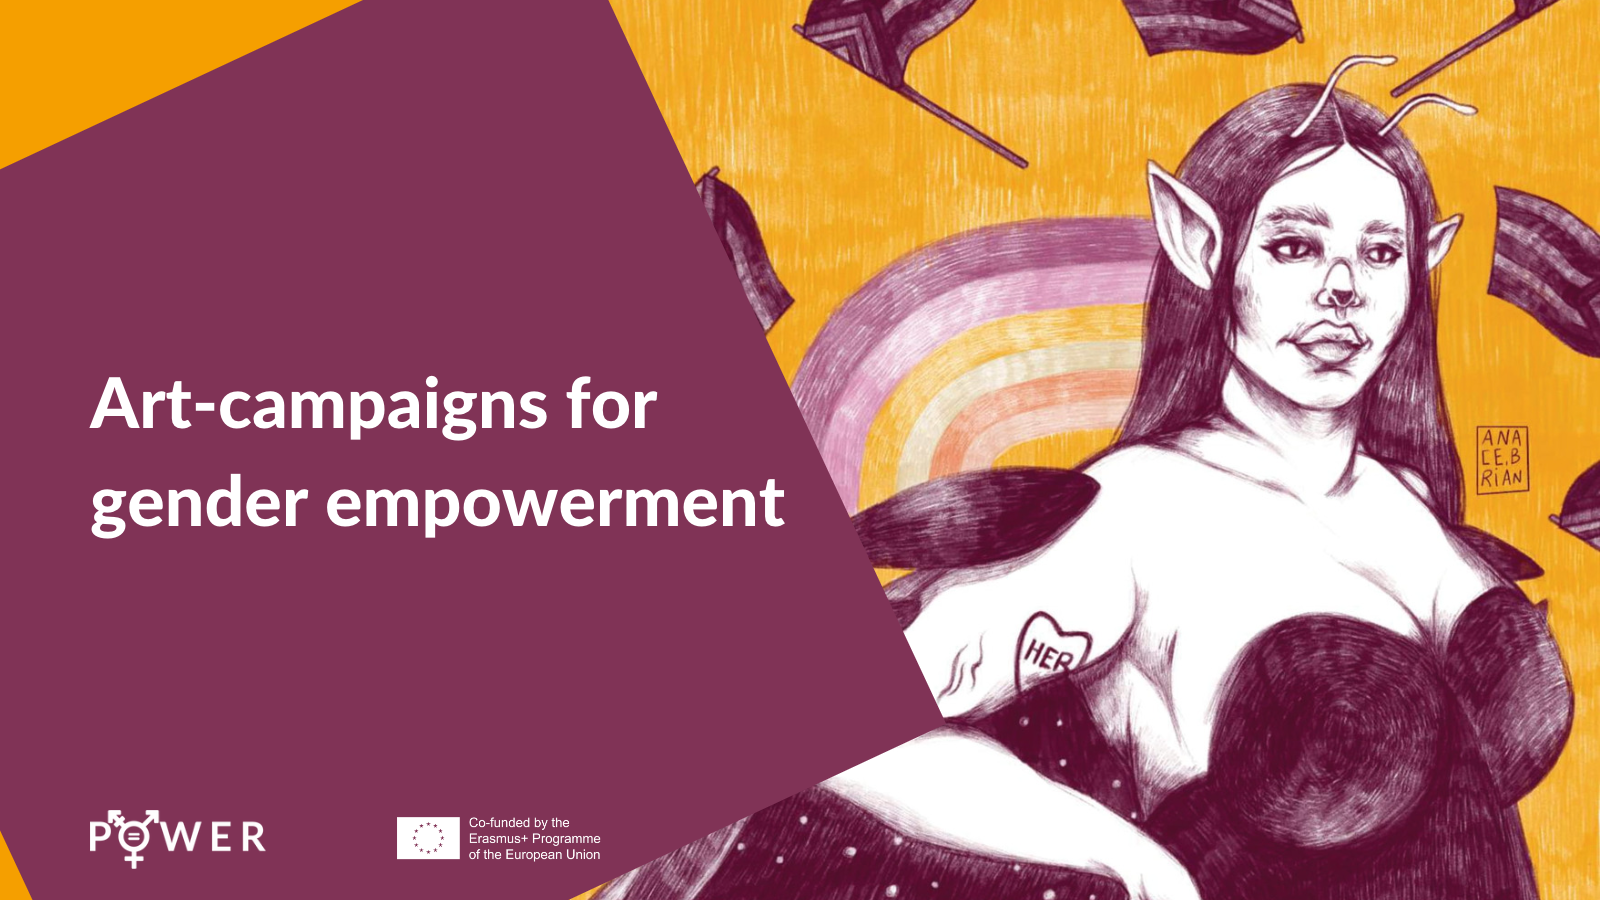 IO5 videos and toolkit are online: art campaigns for gender empowerment